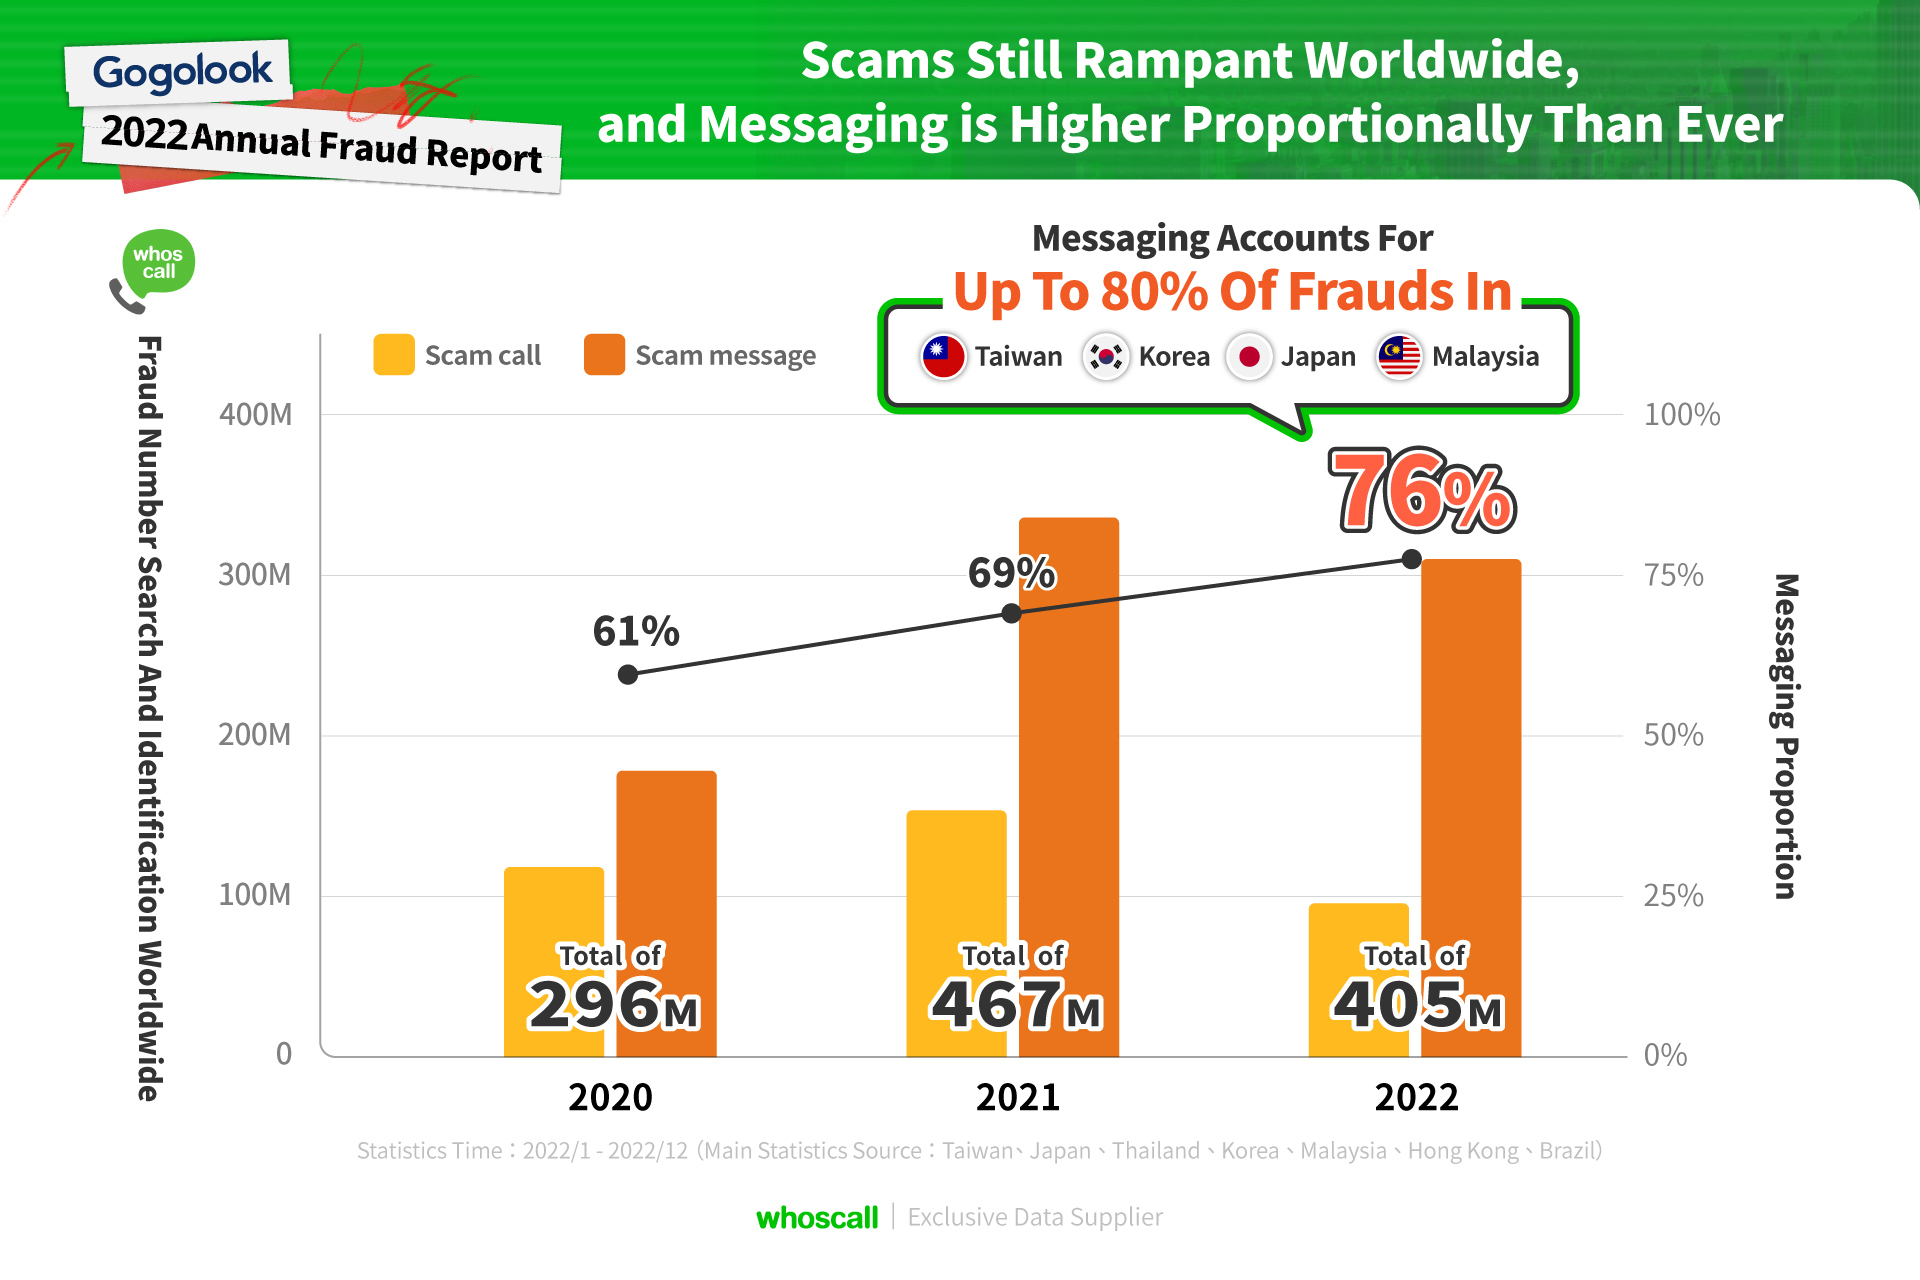 Photo 3_Scams Still Rampant Worldwide, and Messaging is Higher Proportionally Than Ever